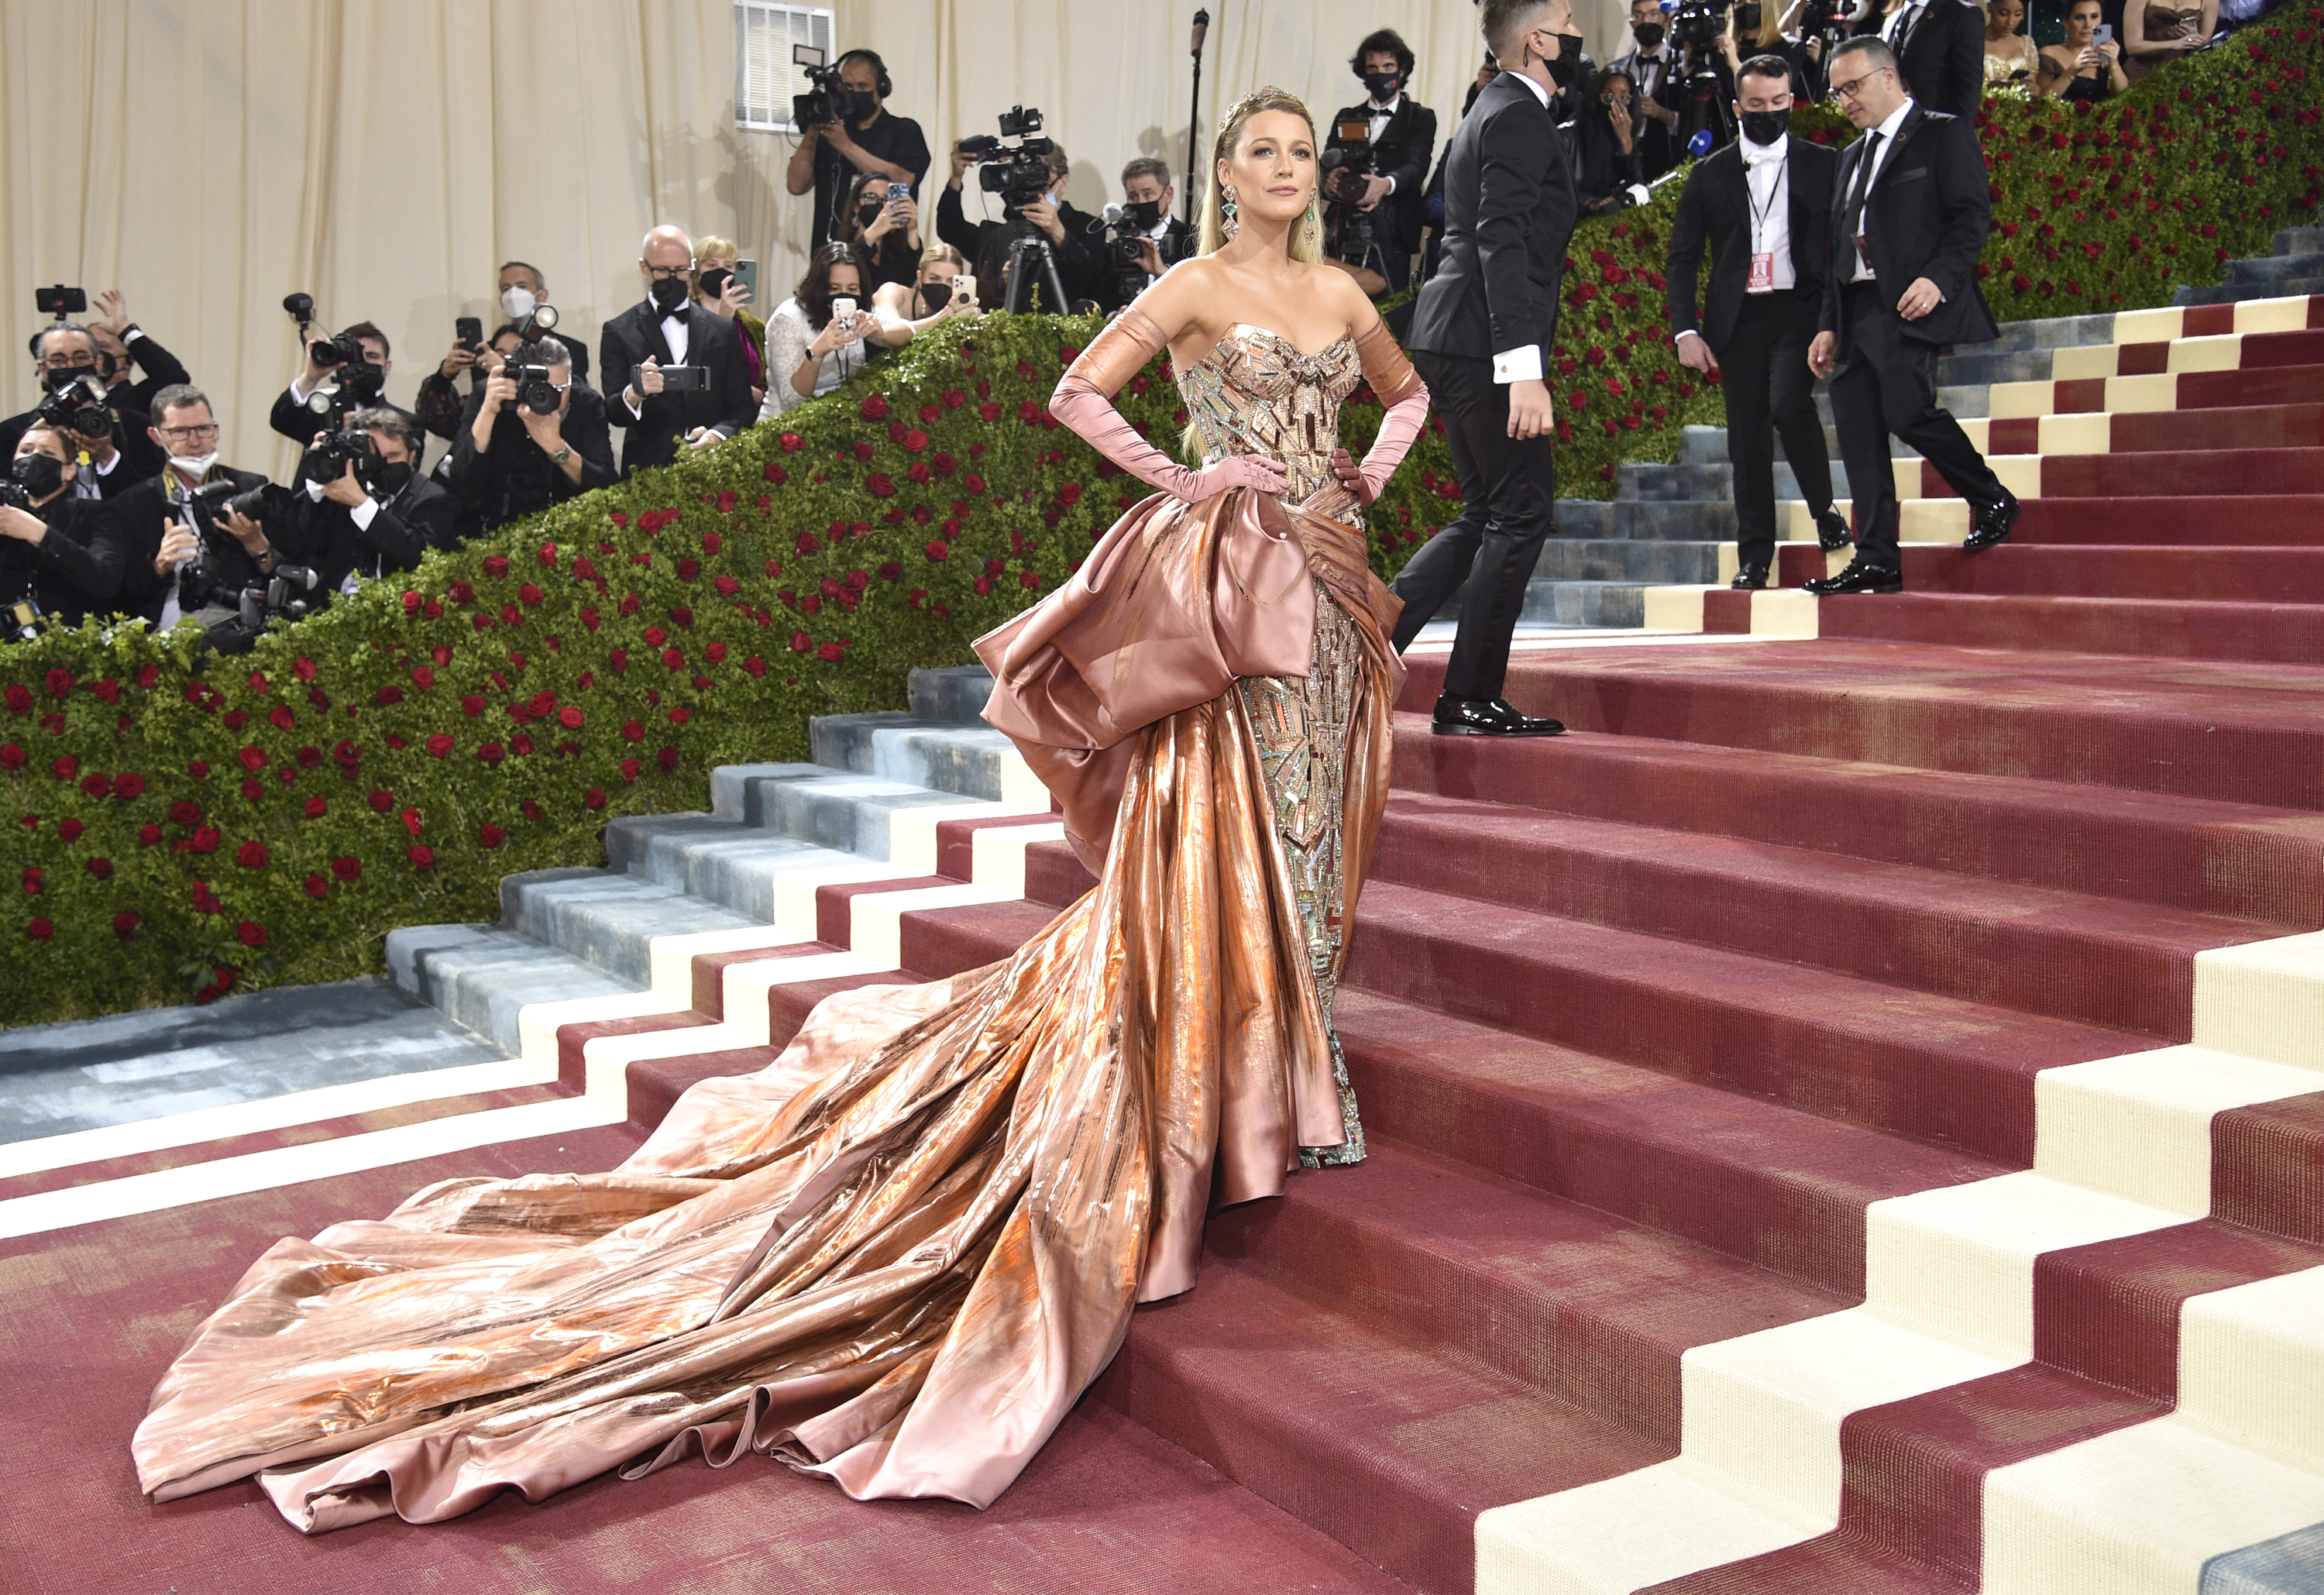 Blake Lively attends The Metropolitan Museum of Art's Costume Institute benefit gala 